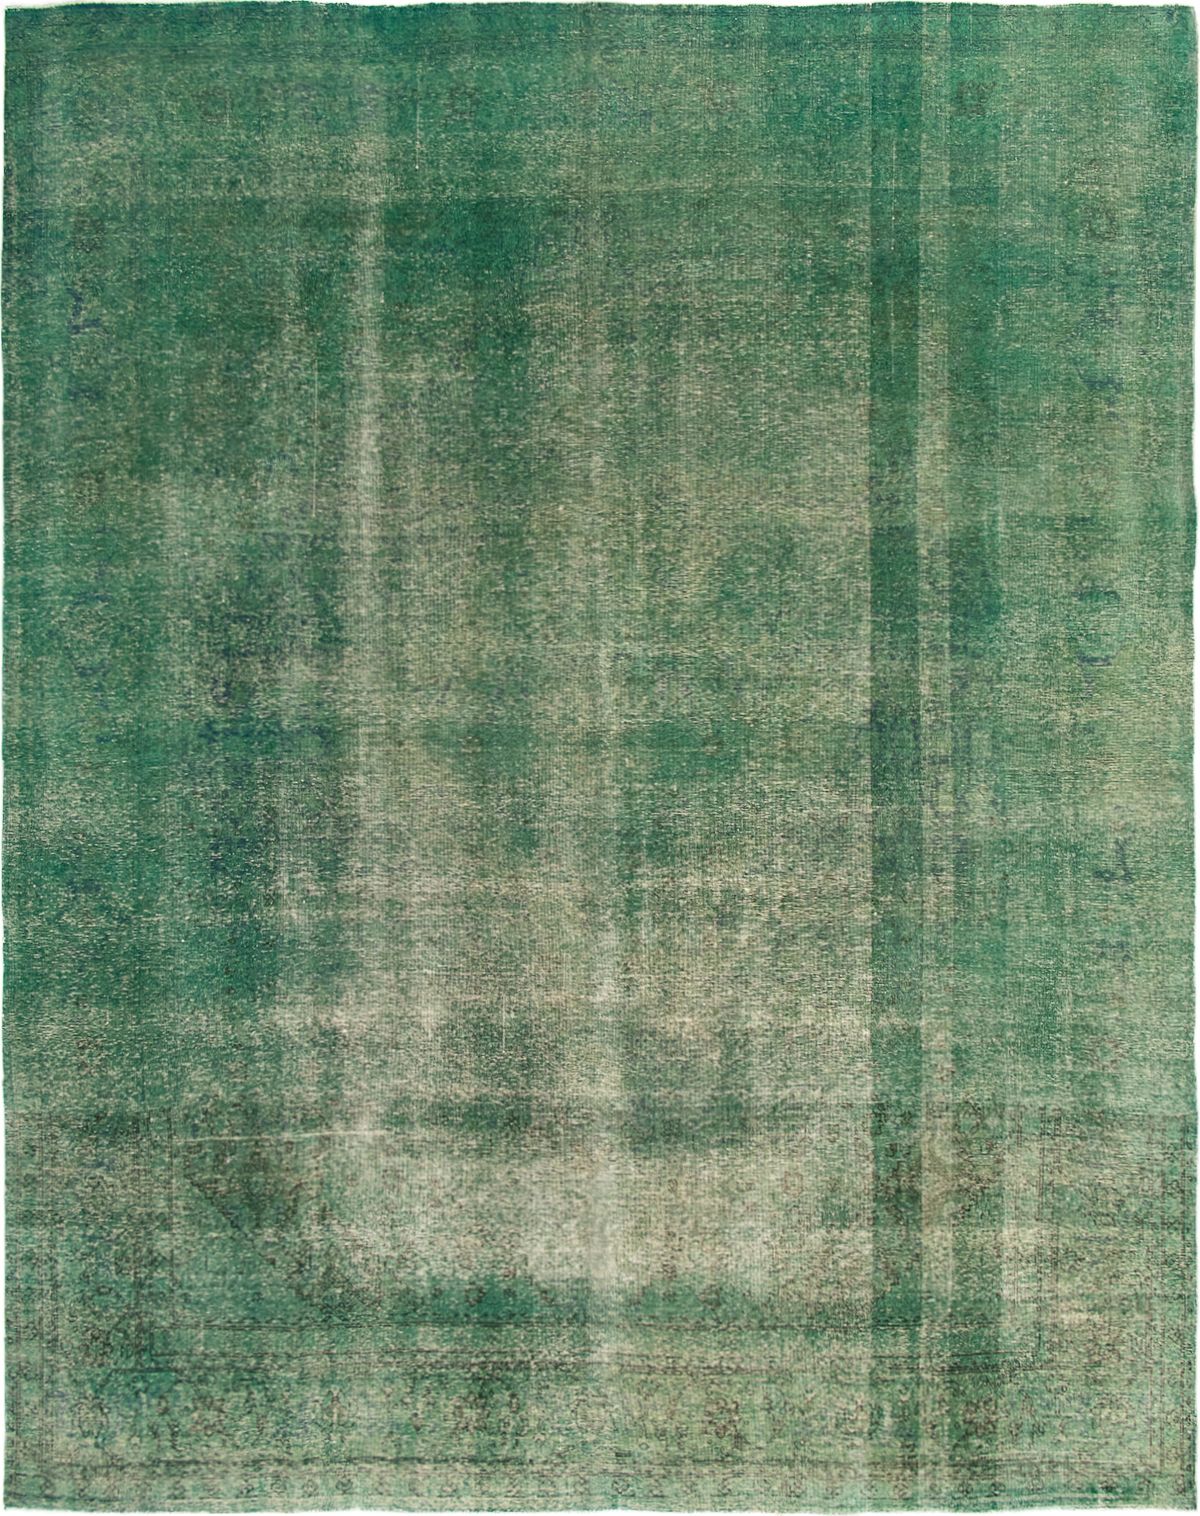 Hand-knotted Color Transition Teal Wool Rug 9'11" x 12'6" Size: 9'11" x 12'6"  